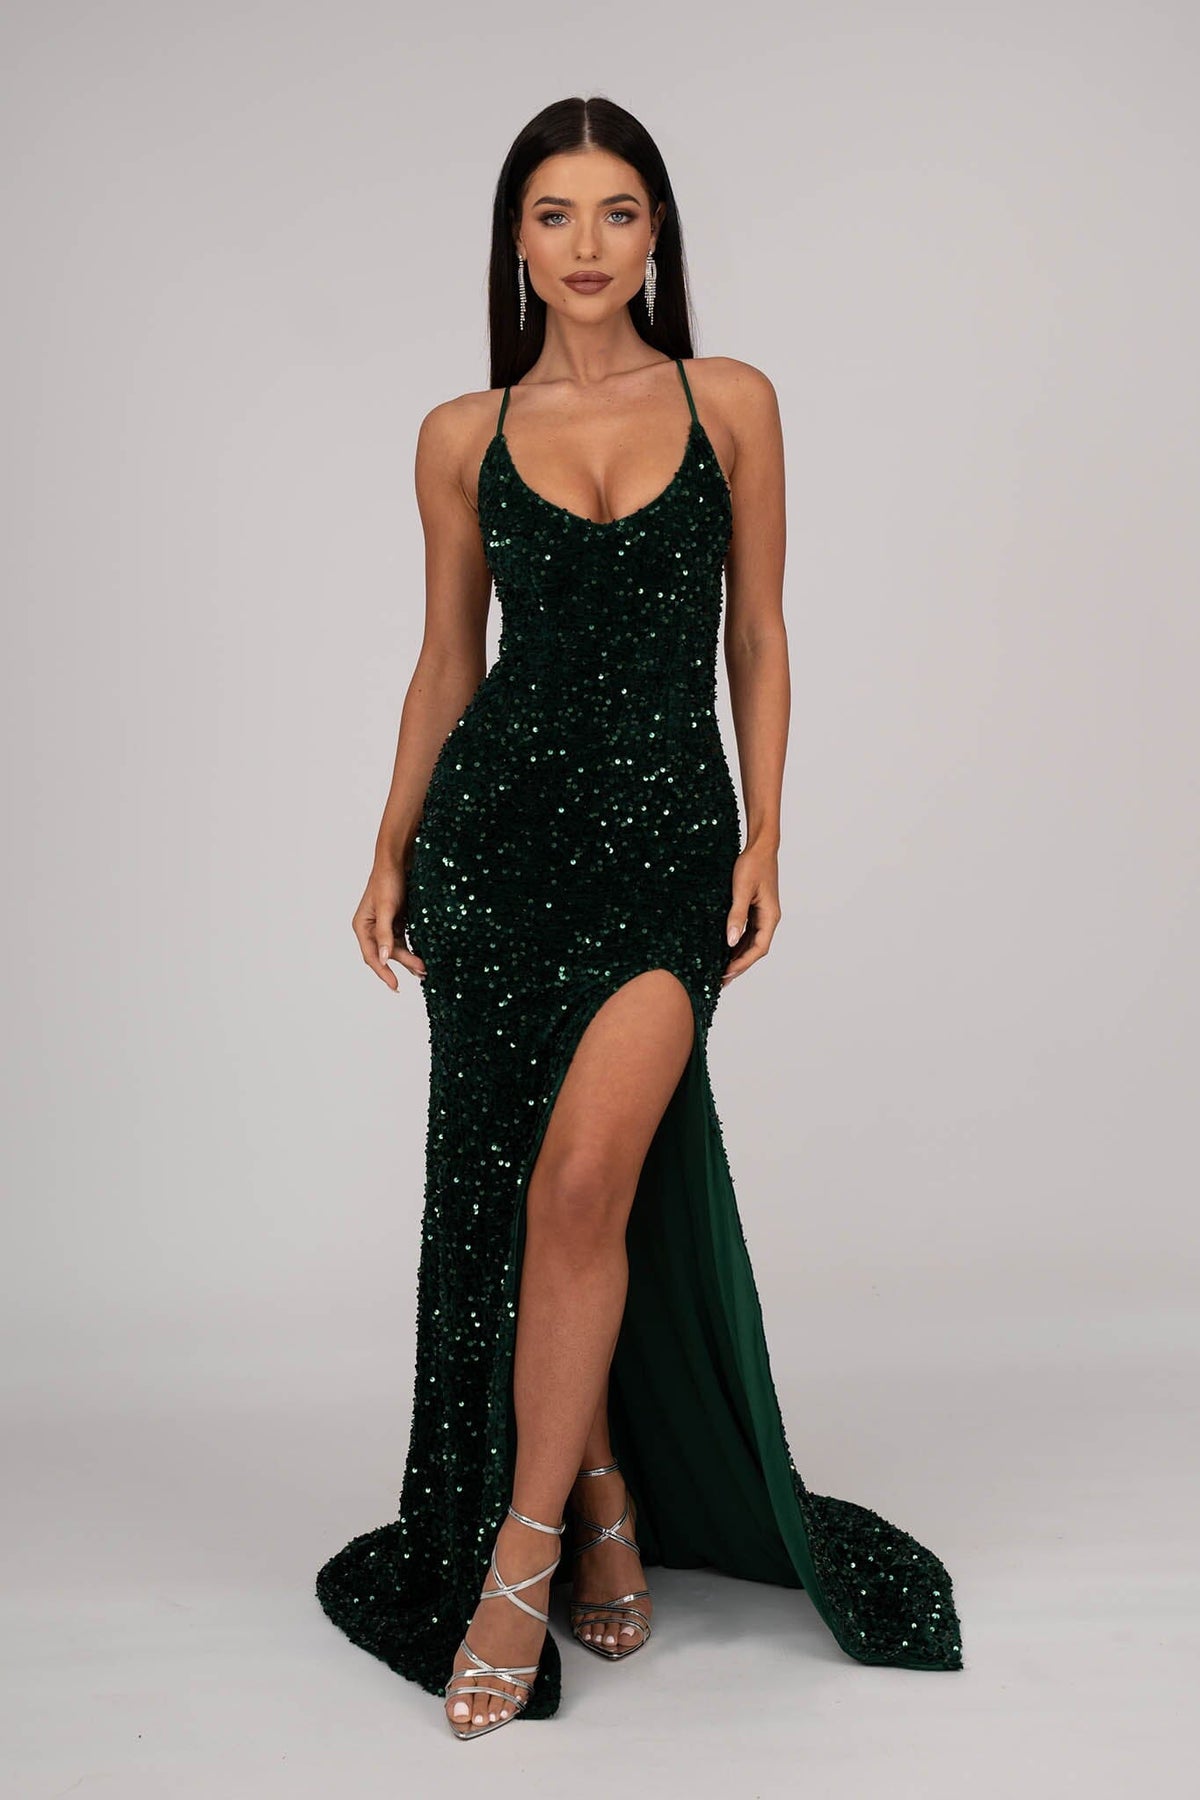 Emerald Green Velvet Sequin Full Length Evening Gown with V Neckline, Thin Shoulder Straps, Thigh High Side Split and Lace Up Open Back